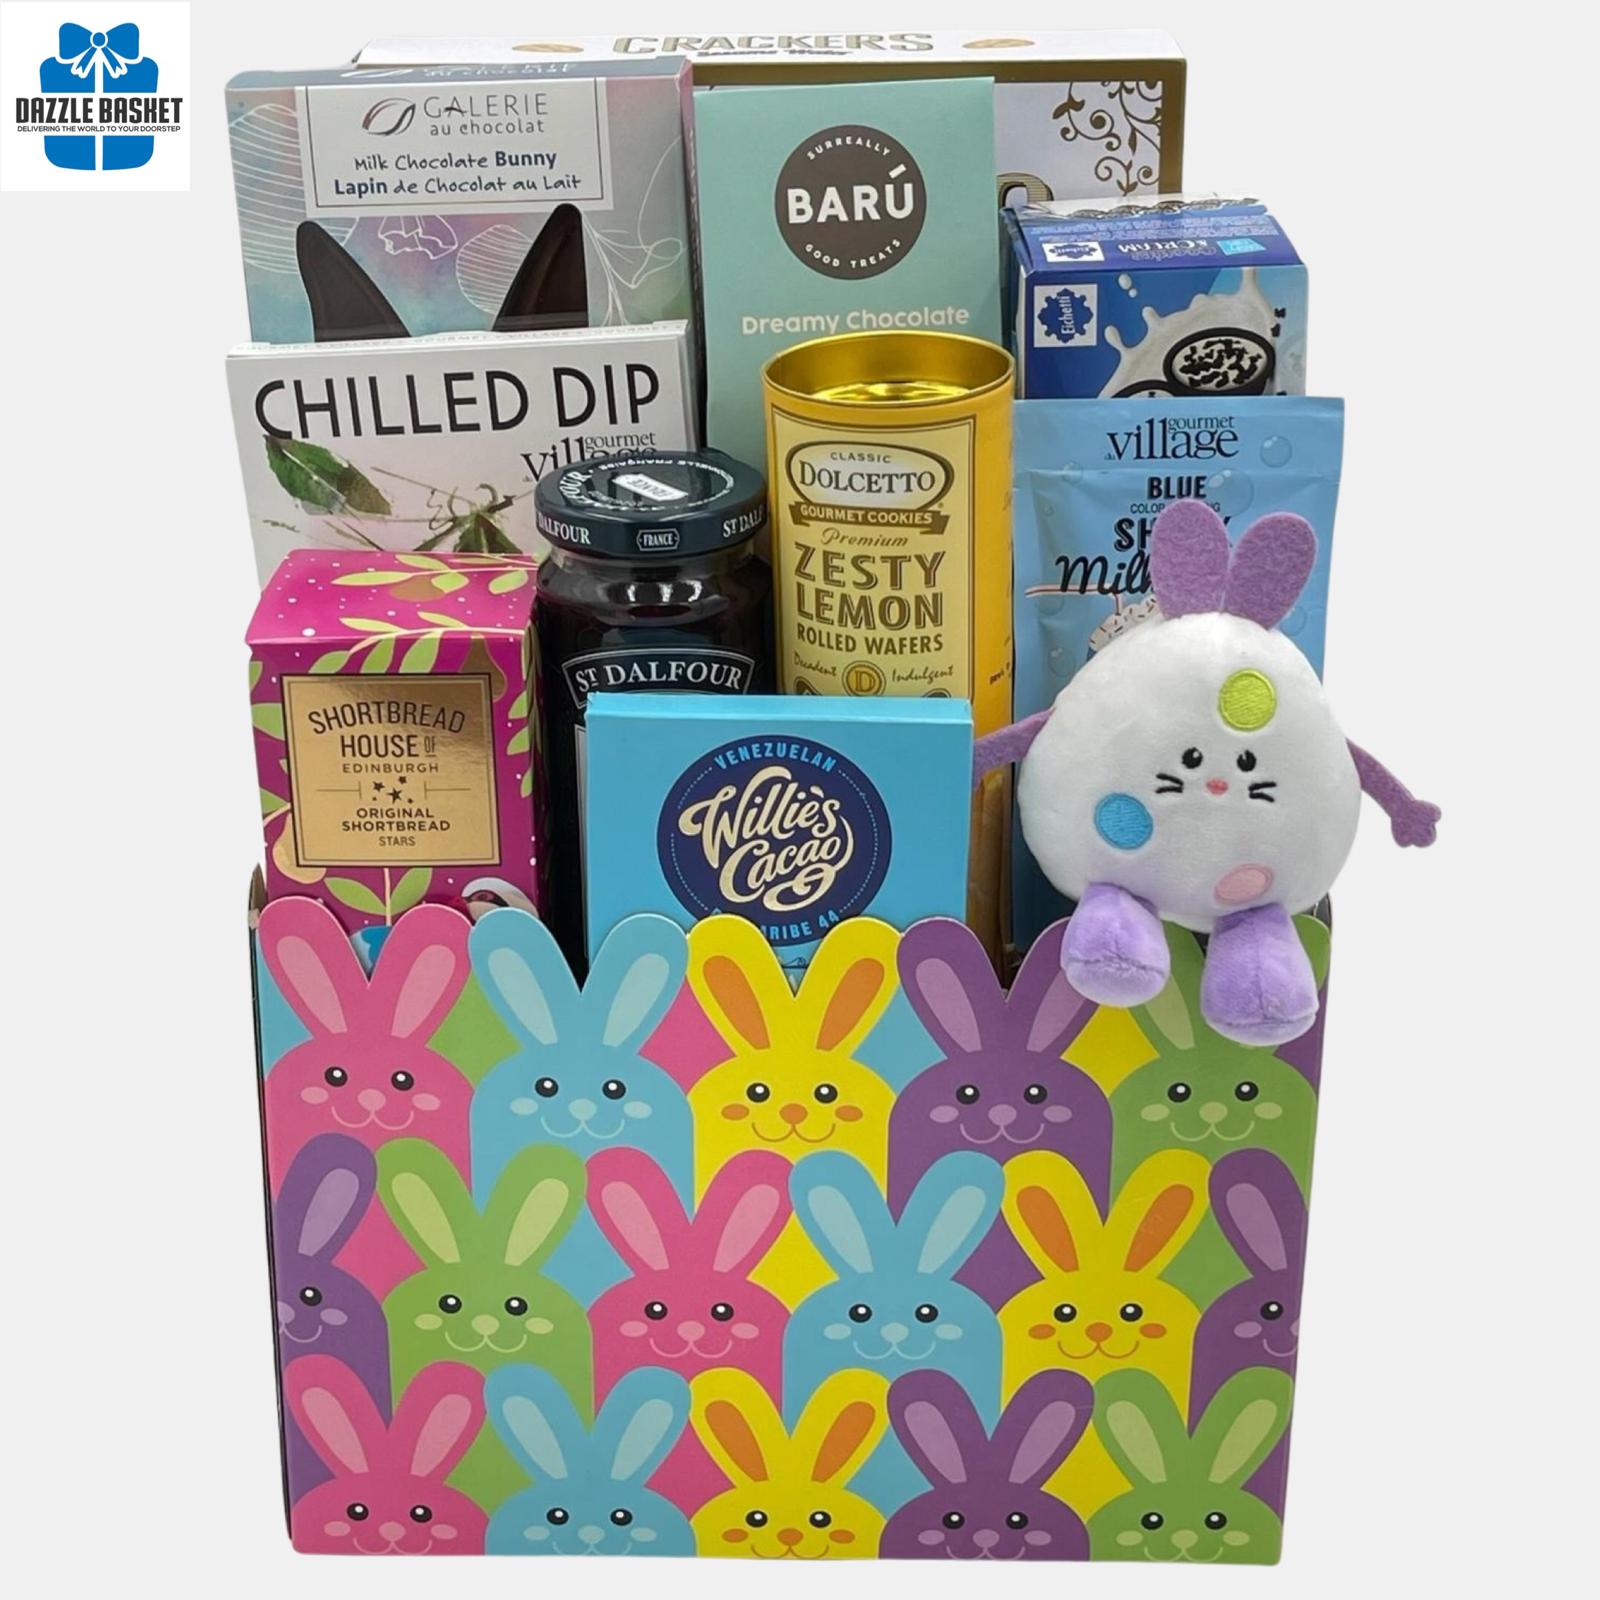 A Calgary Easter gift basket with Easter themed chocolates and gourmet snacks arranged beautifully in a bunny themed box.